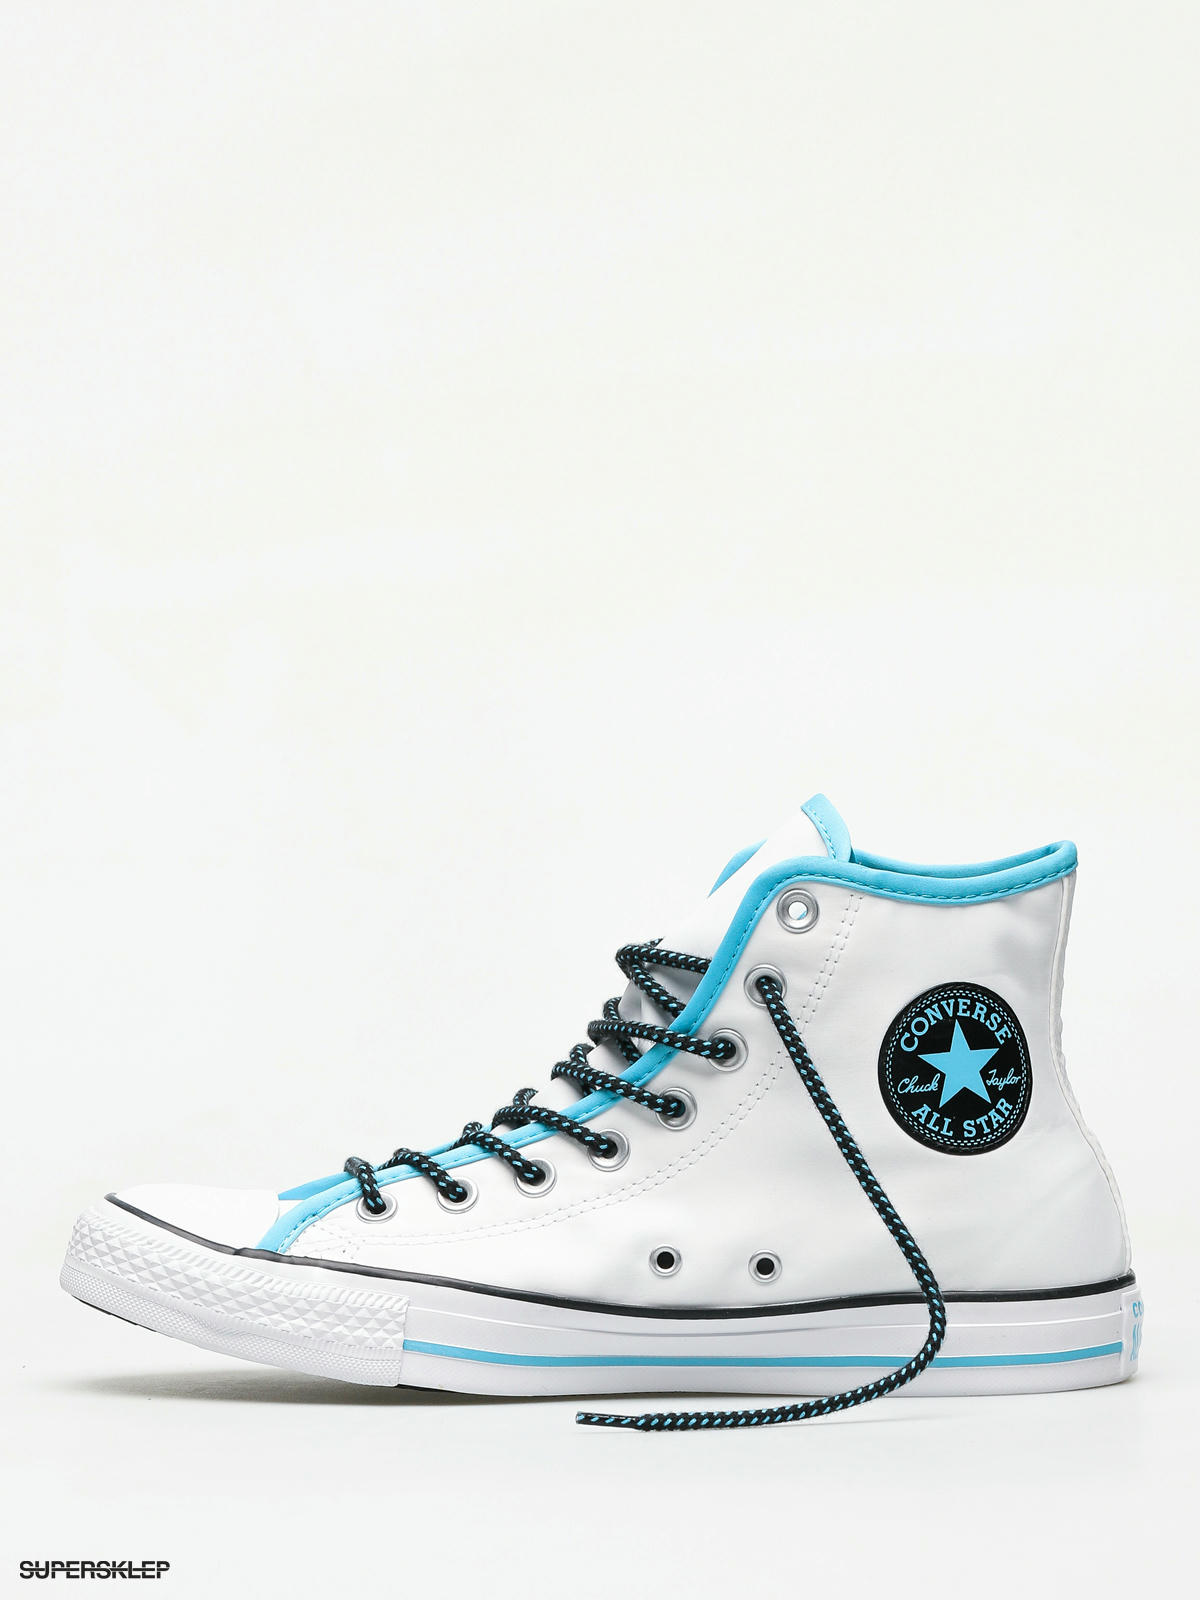 converse all star blue and white